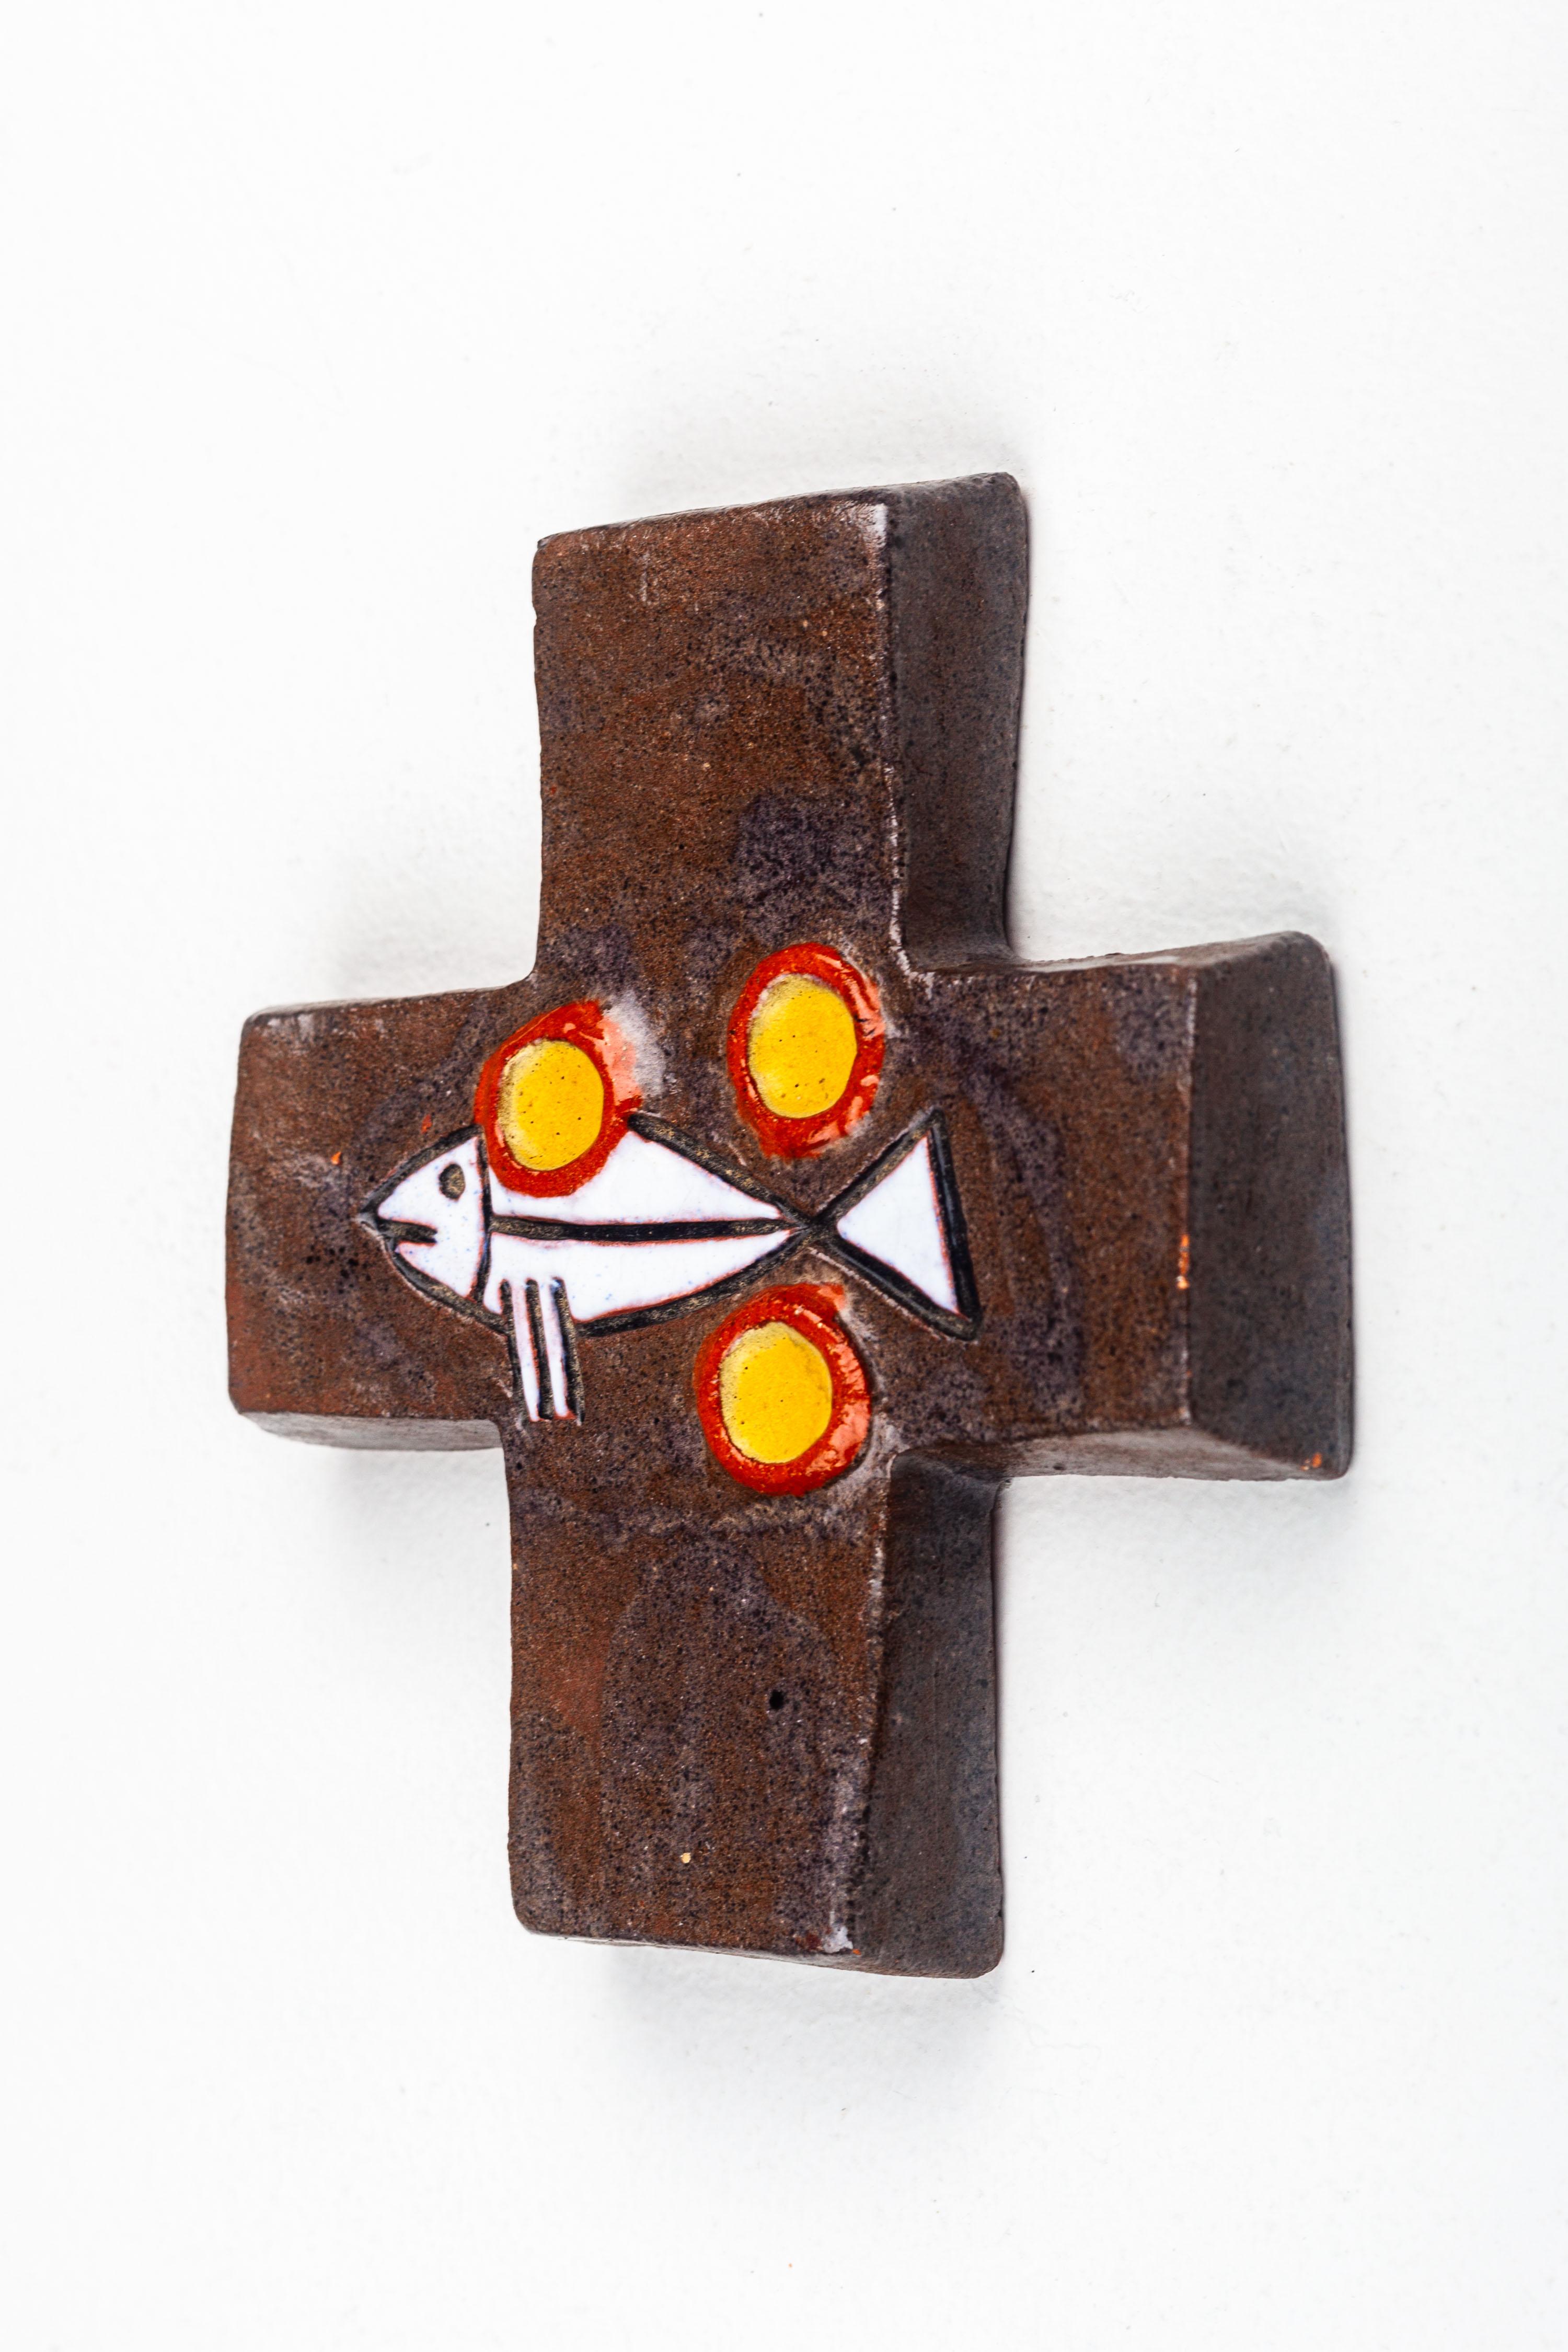 European Semi-Gloss Brown and Black Ceramic Cross With Fish and Circular Embellishments  For Sale